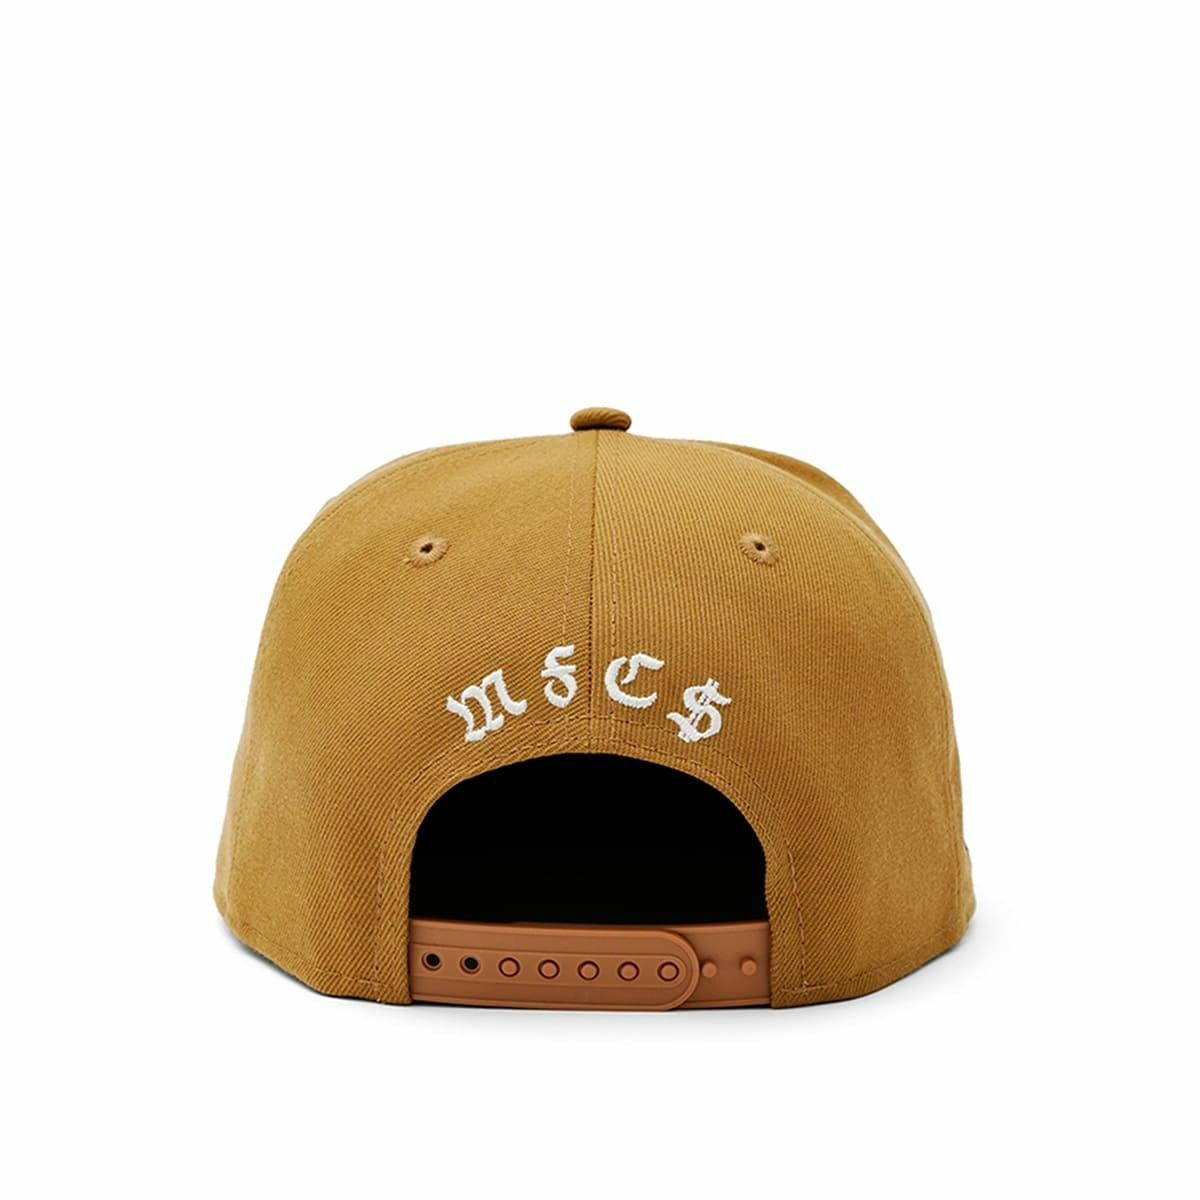 NEW ERA × MFC STORE SNAPBACK M＄ DICE FRAME 9FIFTY【13357971】